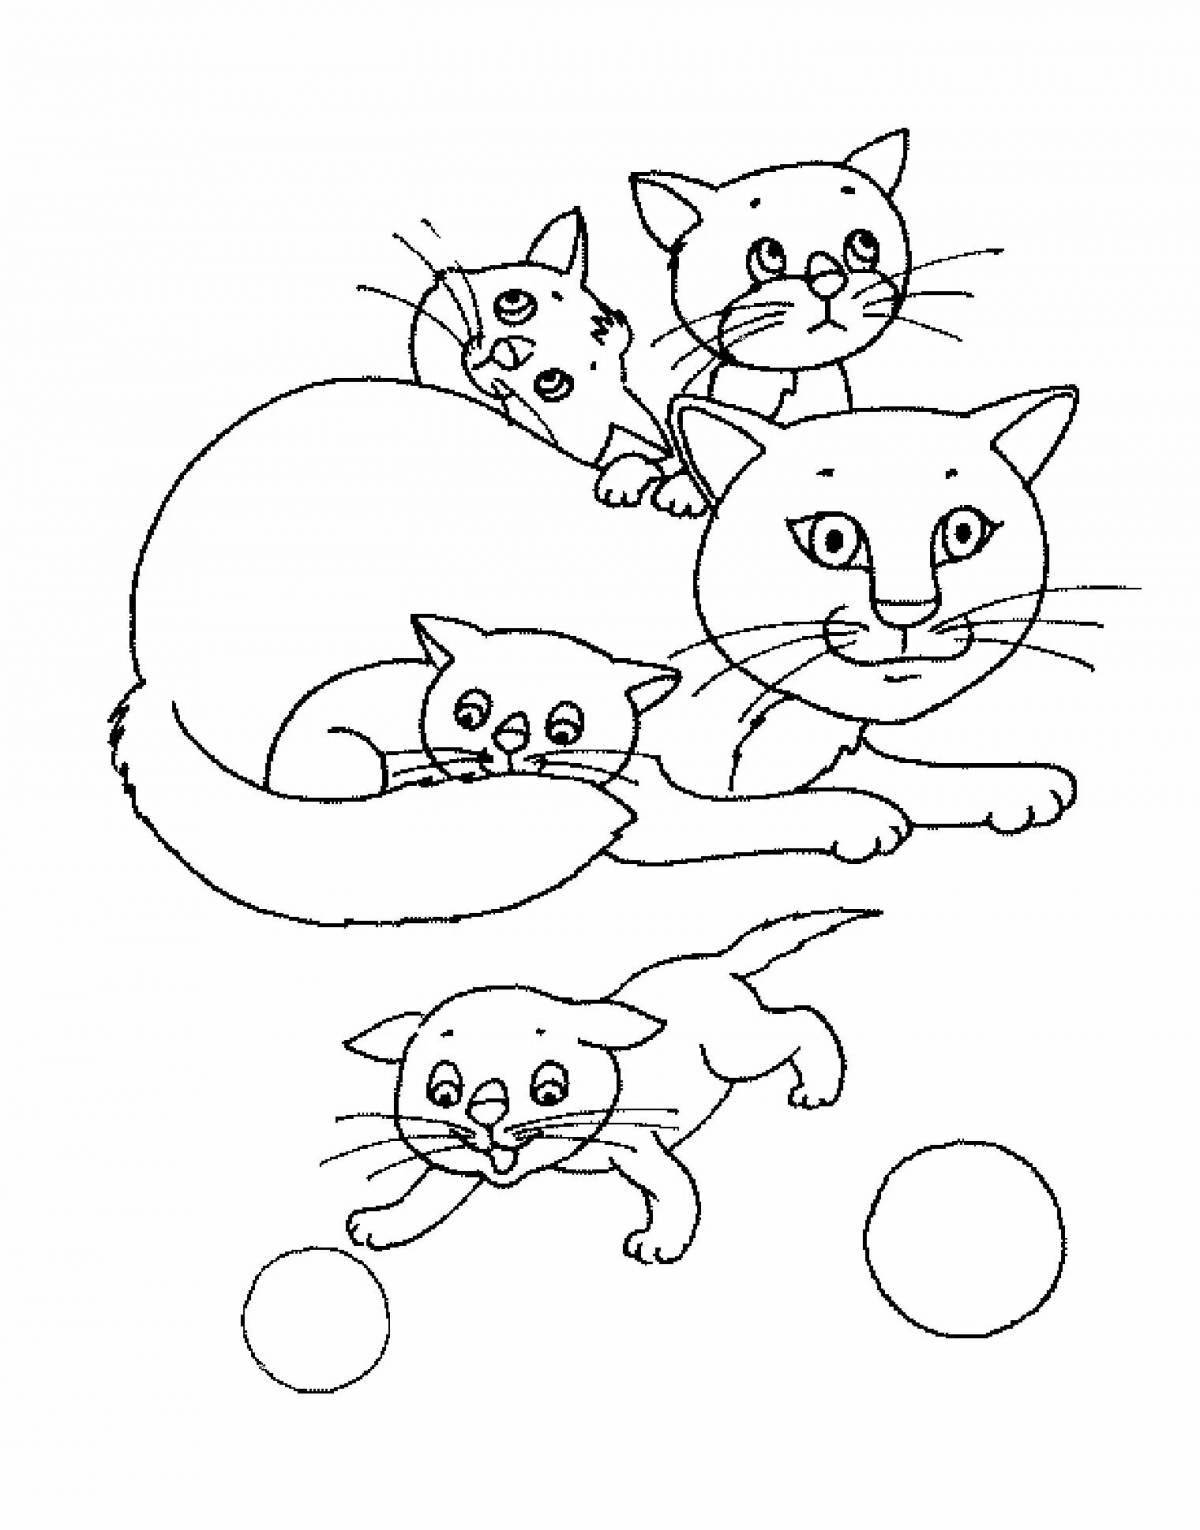 Adorable pet coloring book for kids 5-7 years old